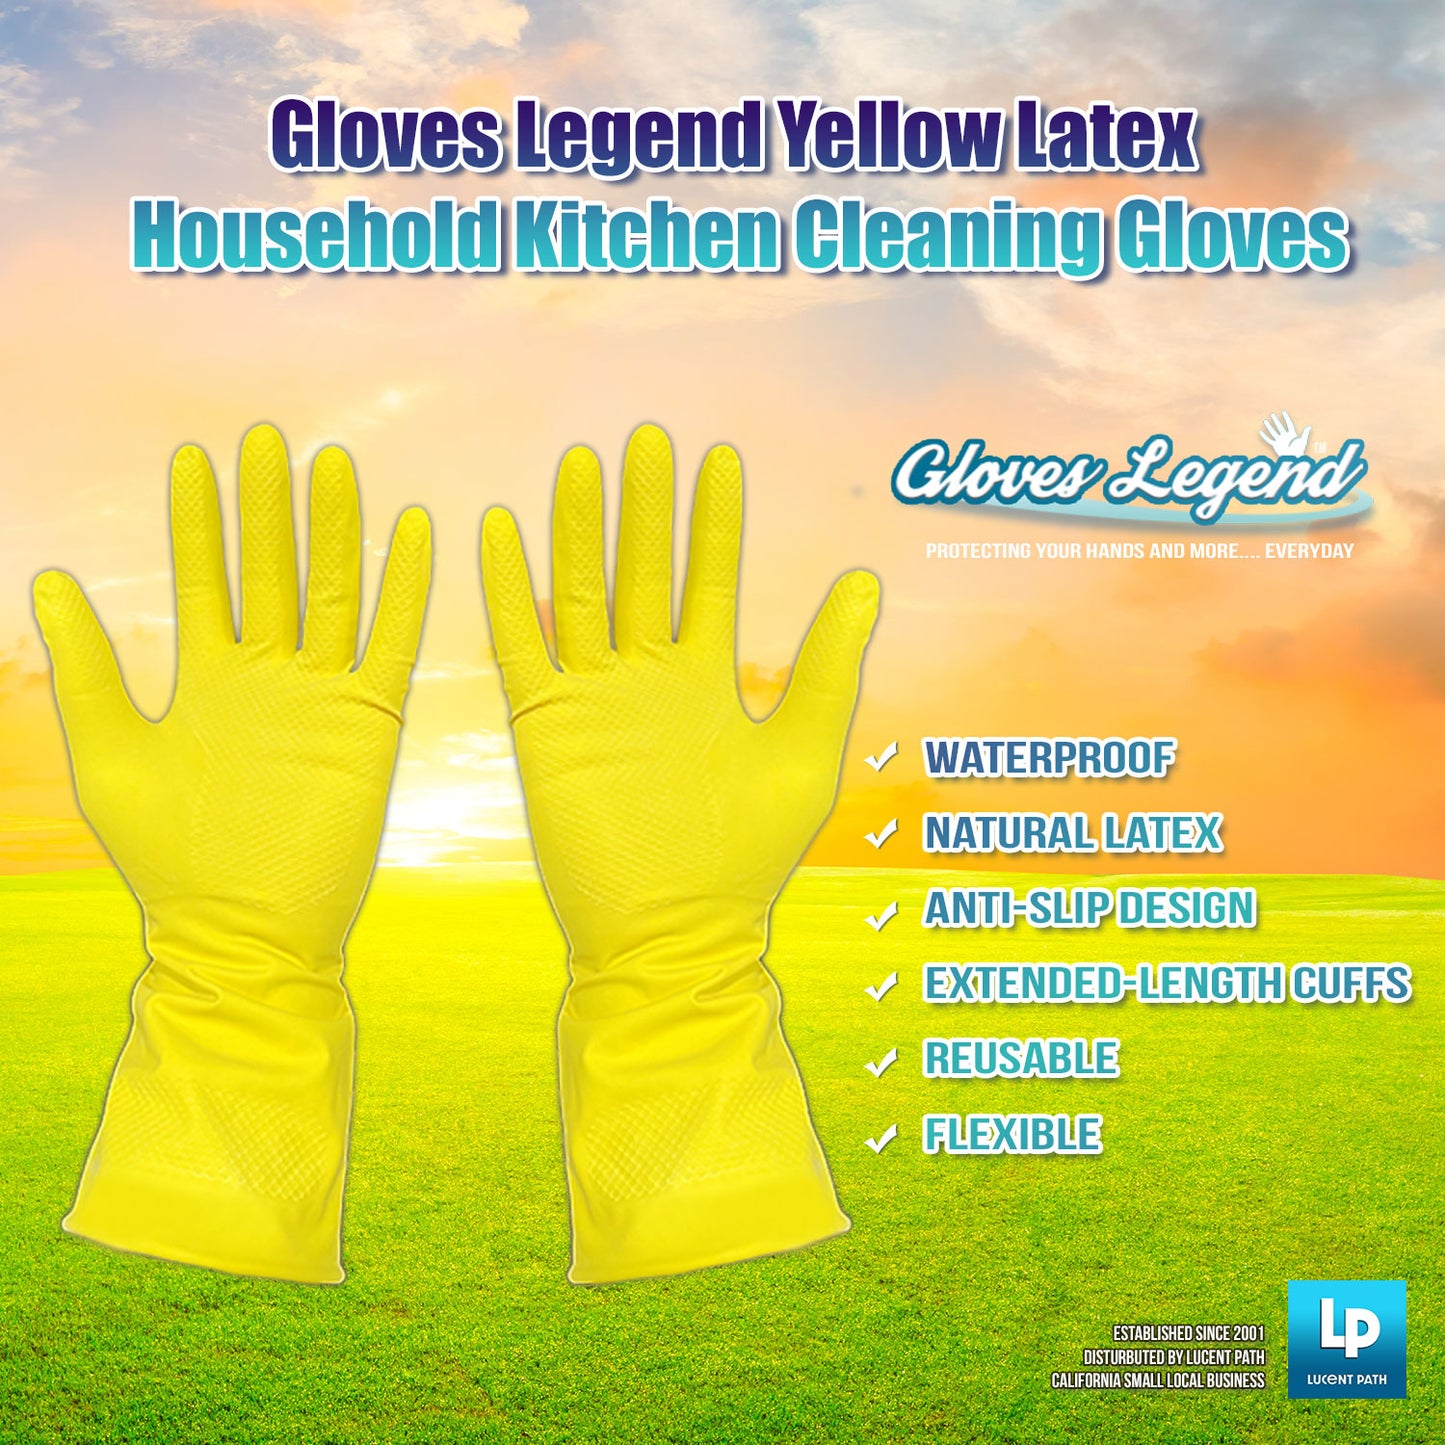 Large - 6 Pairs (12 Gloves) 12" Gloves Legend Yellow Latex Household Kitchen Cleaning Dishwashing Gloves - 18 mil